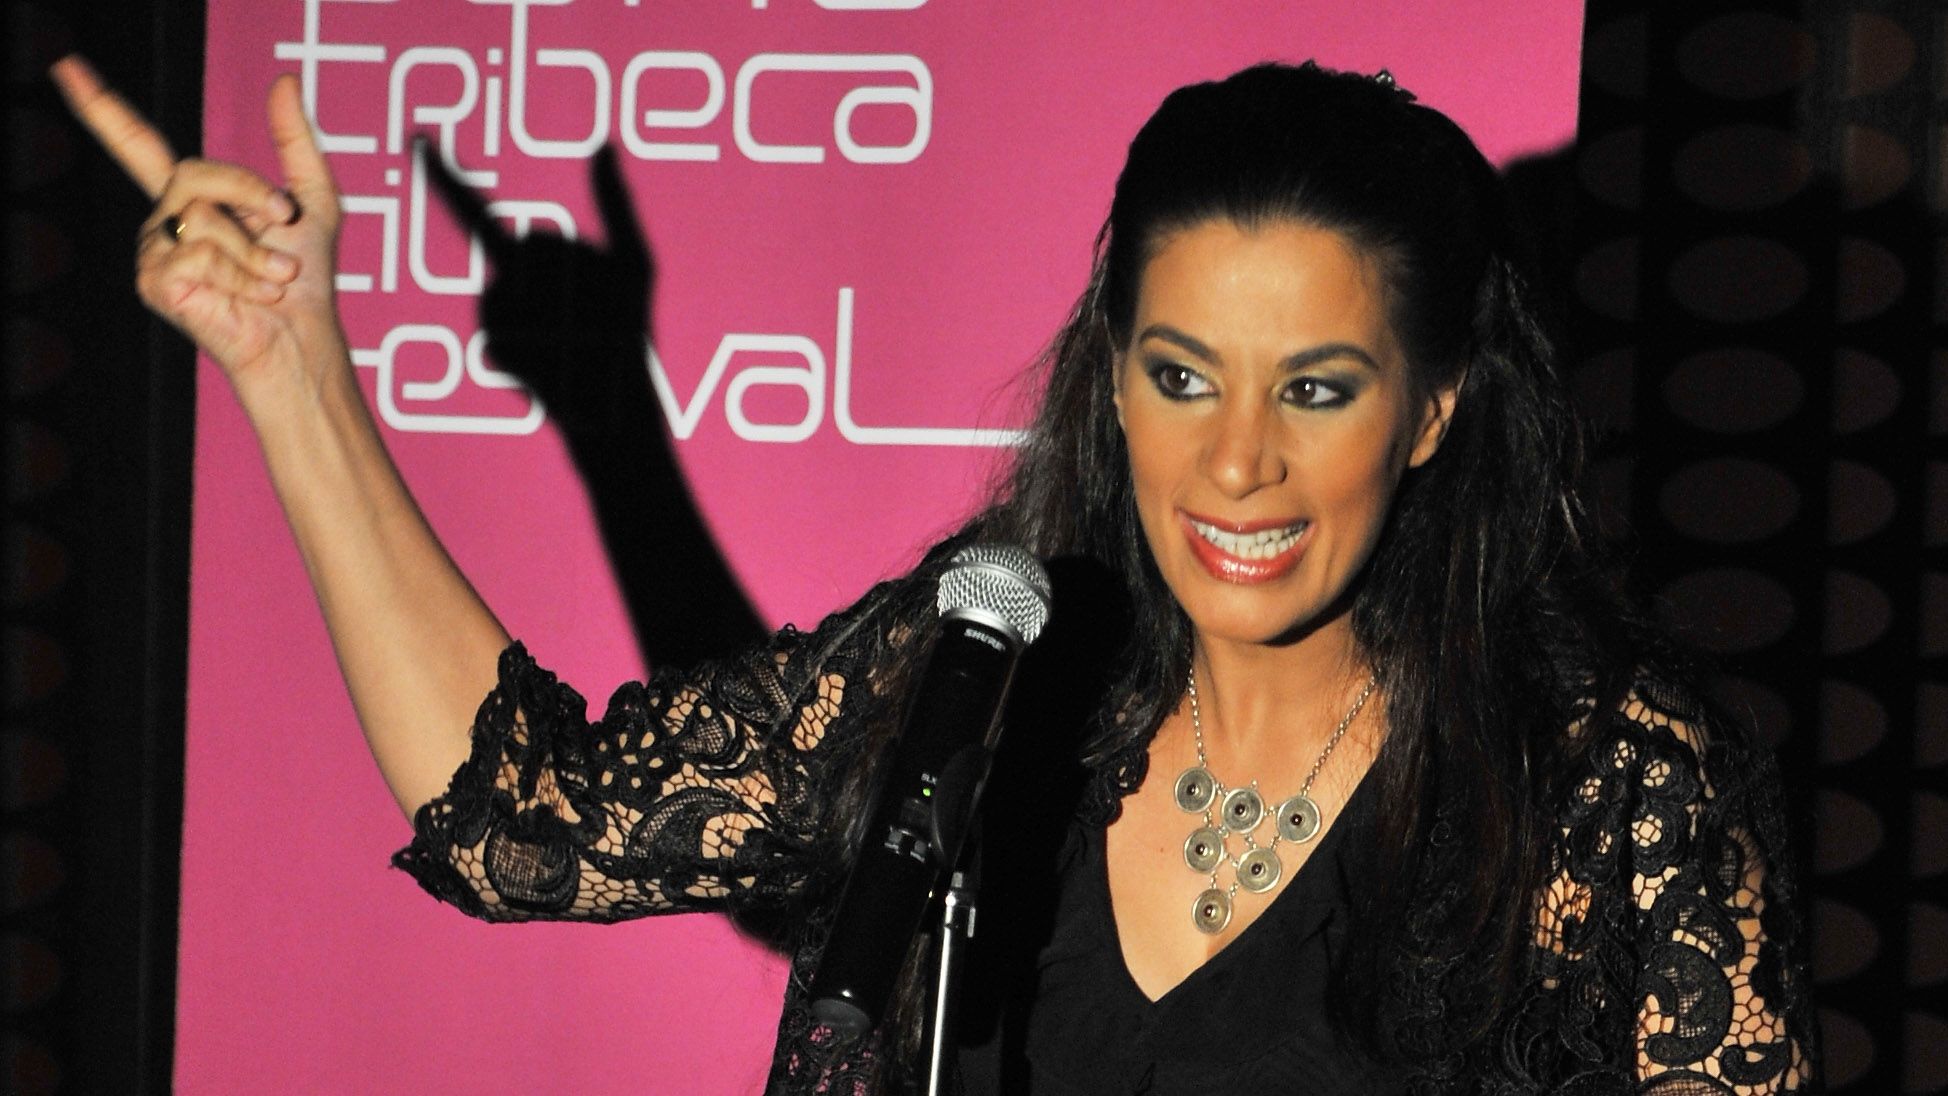 Comedian Maysoon Zayid performs onstage at Comedy Night at the W Hotel Doha during the 2009 Doha Tribeca Film Festival.